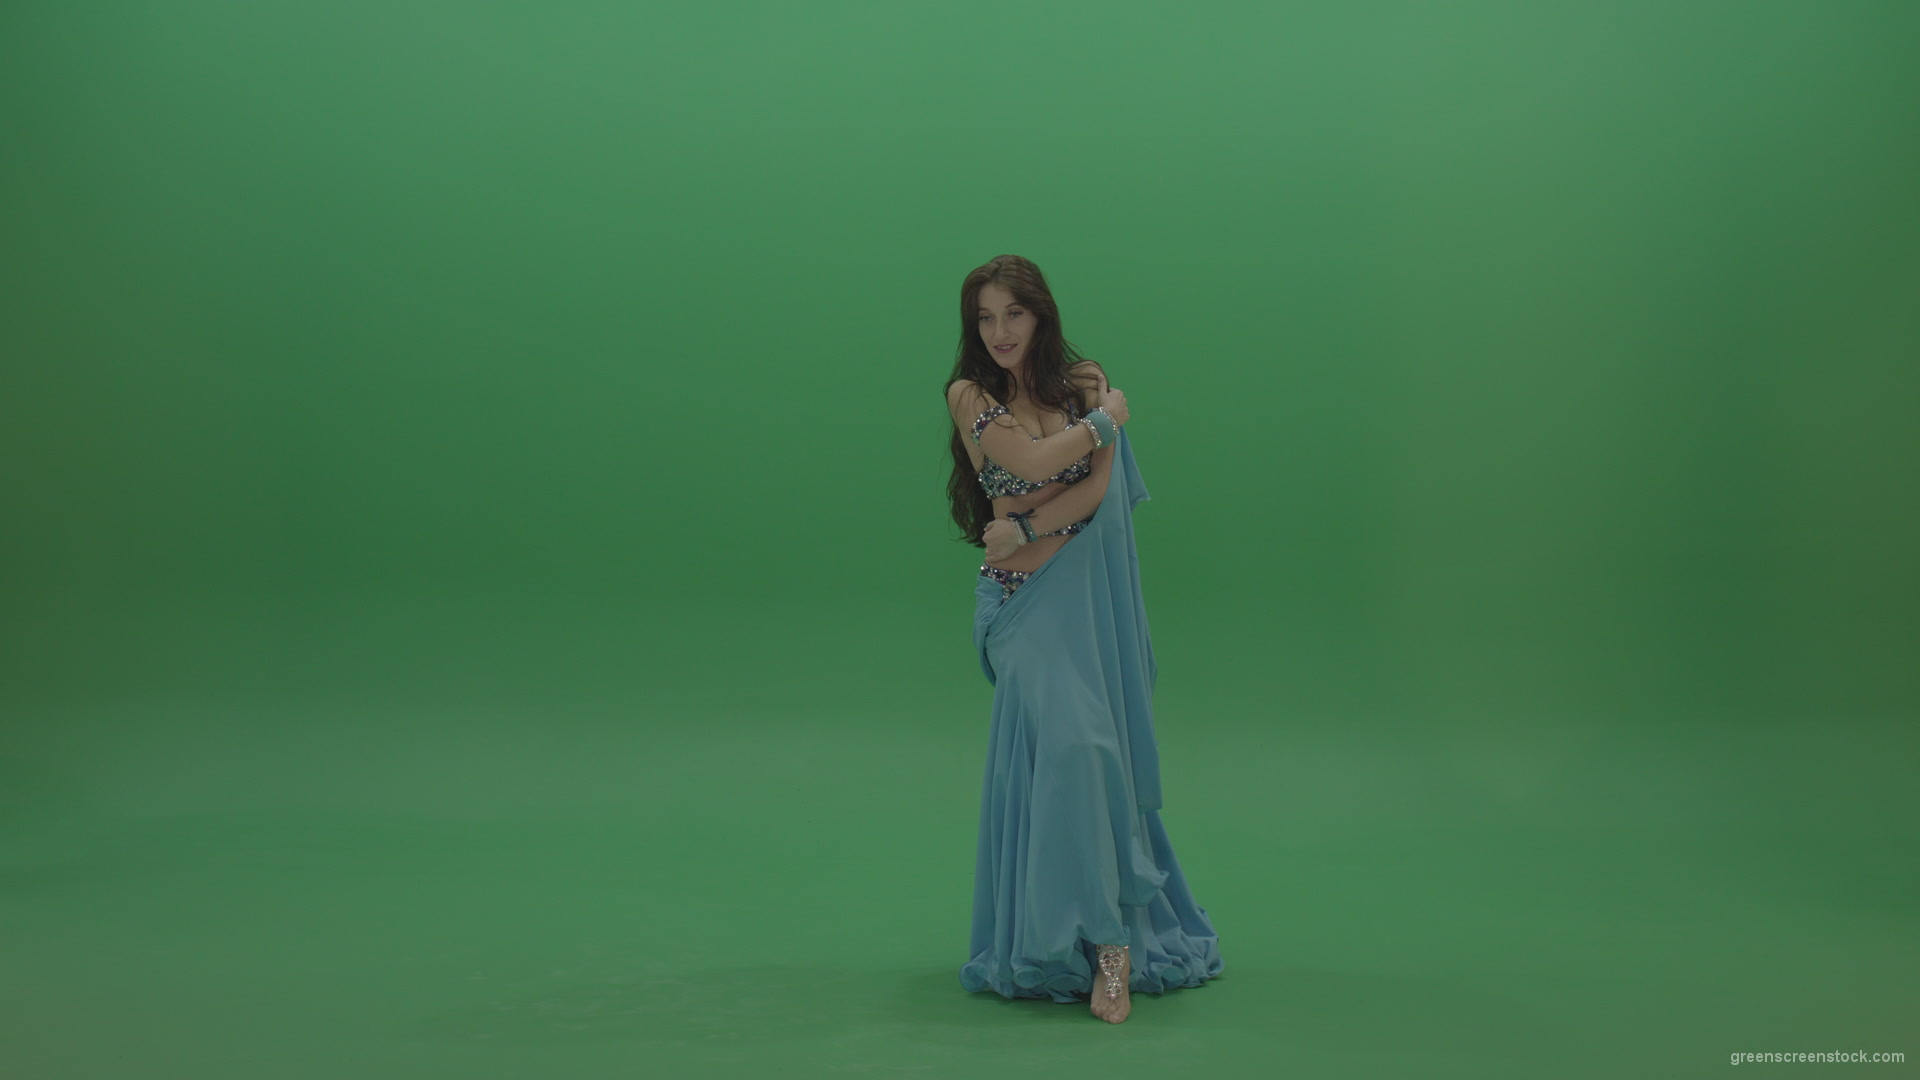 Fair-belly-dancer-in-blue-wear-display-amazing-dance-moves-over-chromakey-background_001 Green Screen Stock